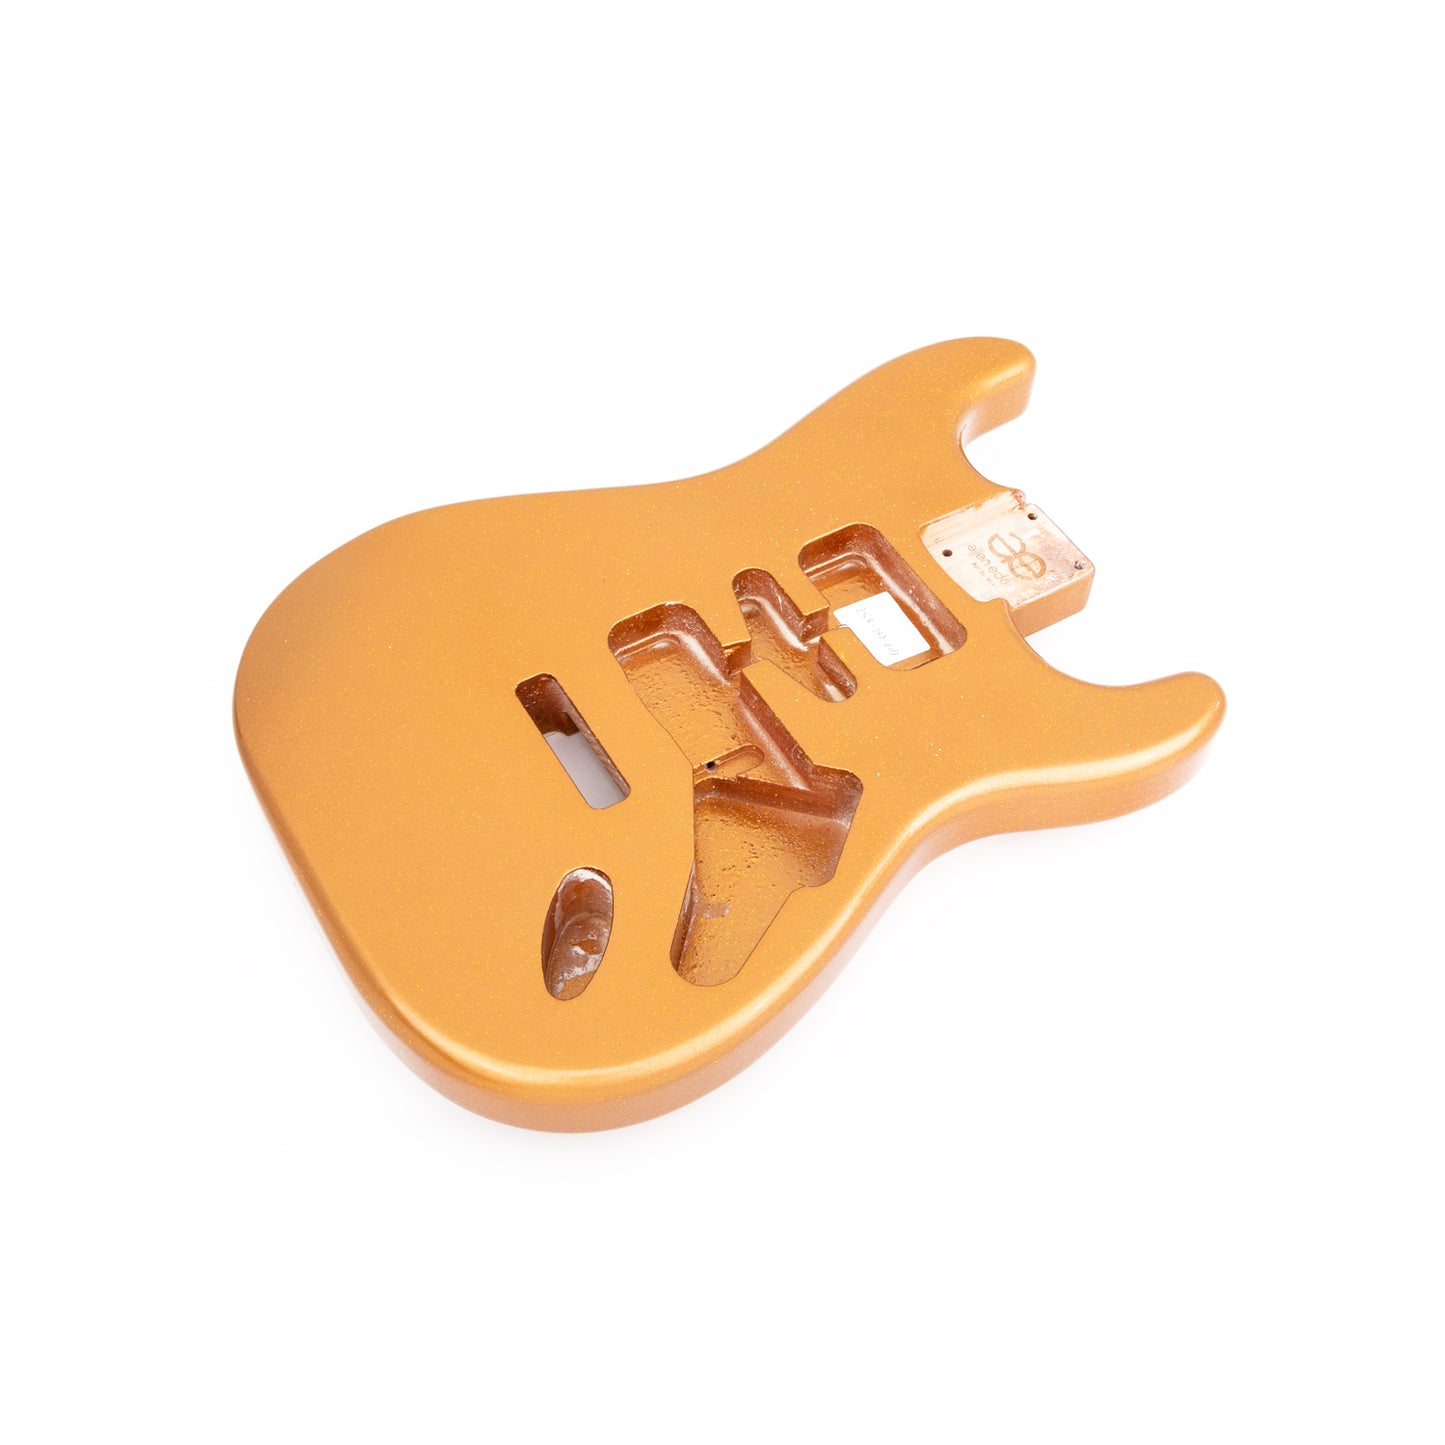 AE Guitars® S-Style Alder Replacement Guitar Body Gold Sparkle